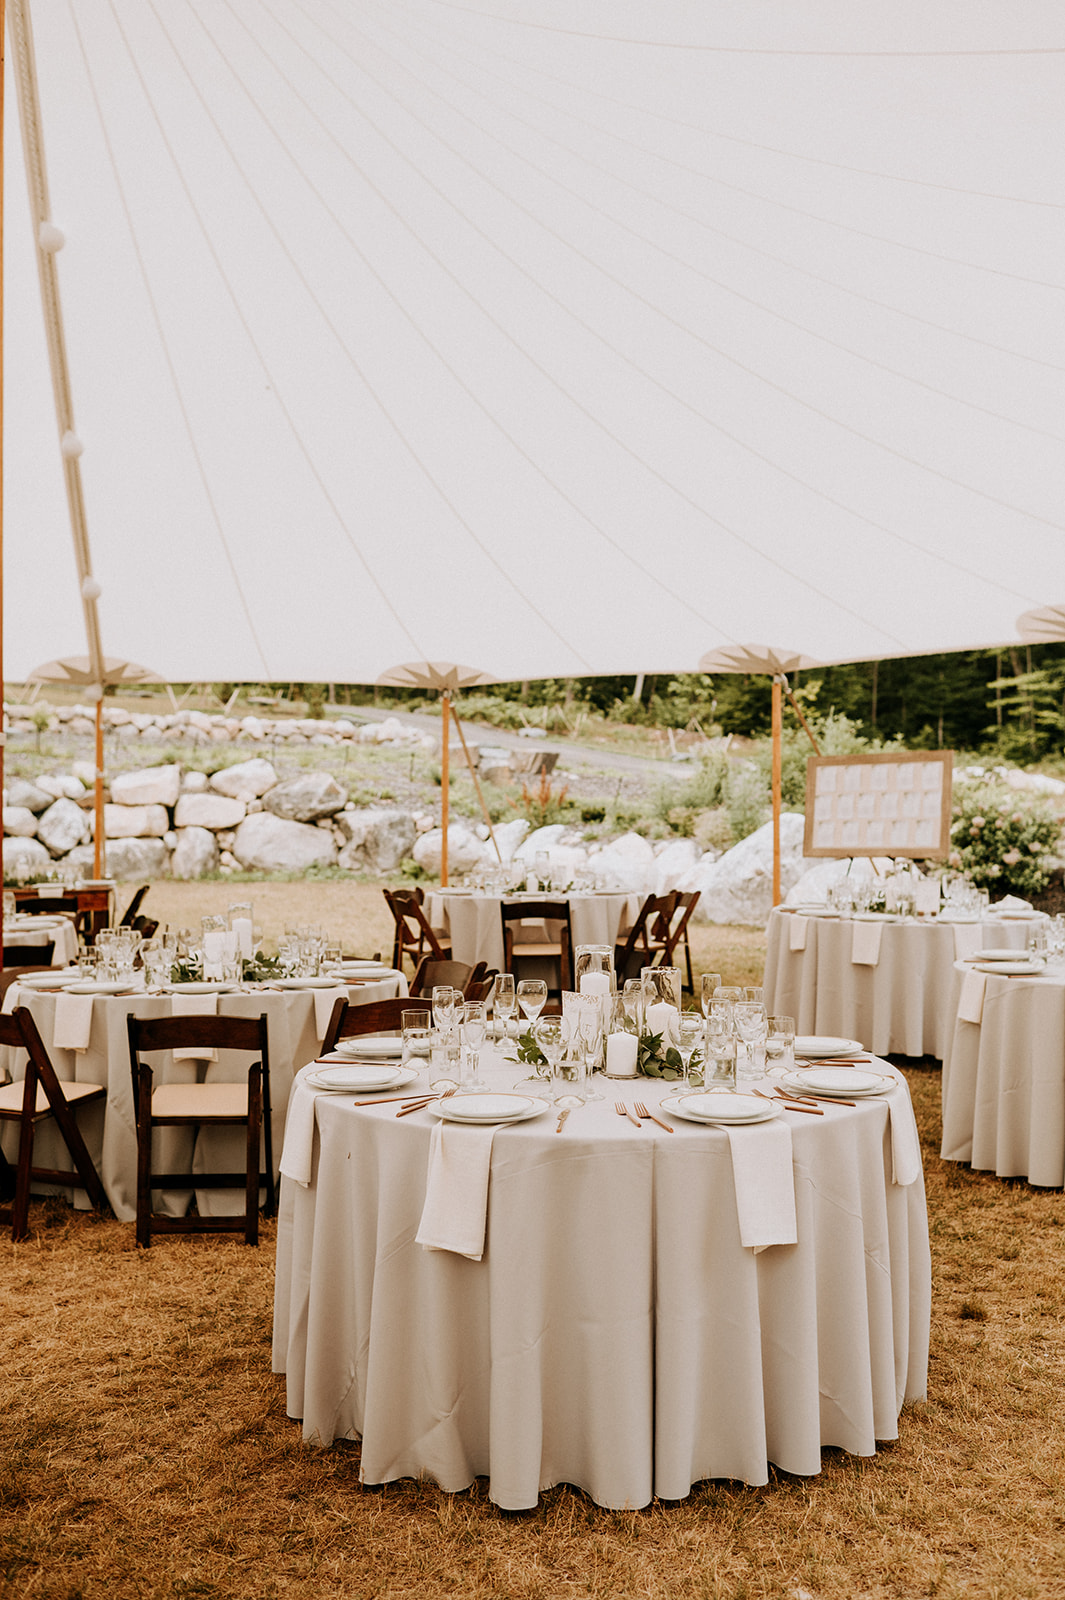 To avoid wasteful wedding items the couple uses reusable table decorations